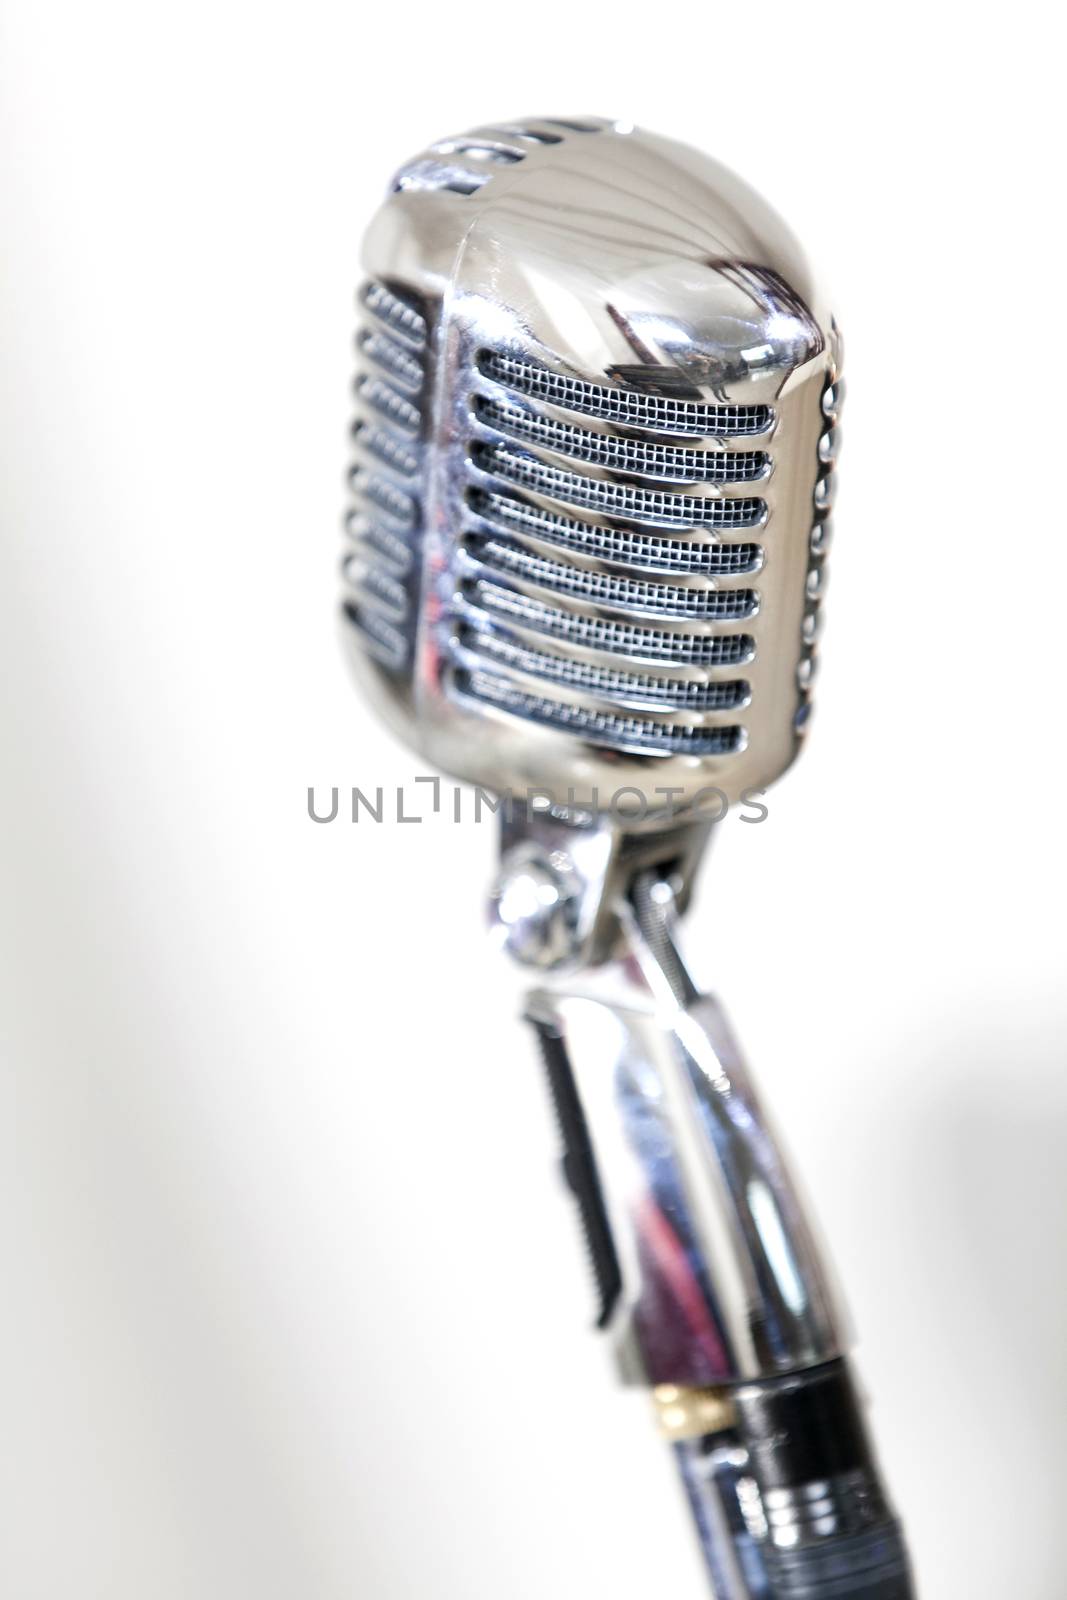 Detail shot of a classic style microphone